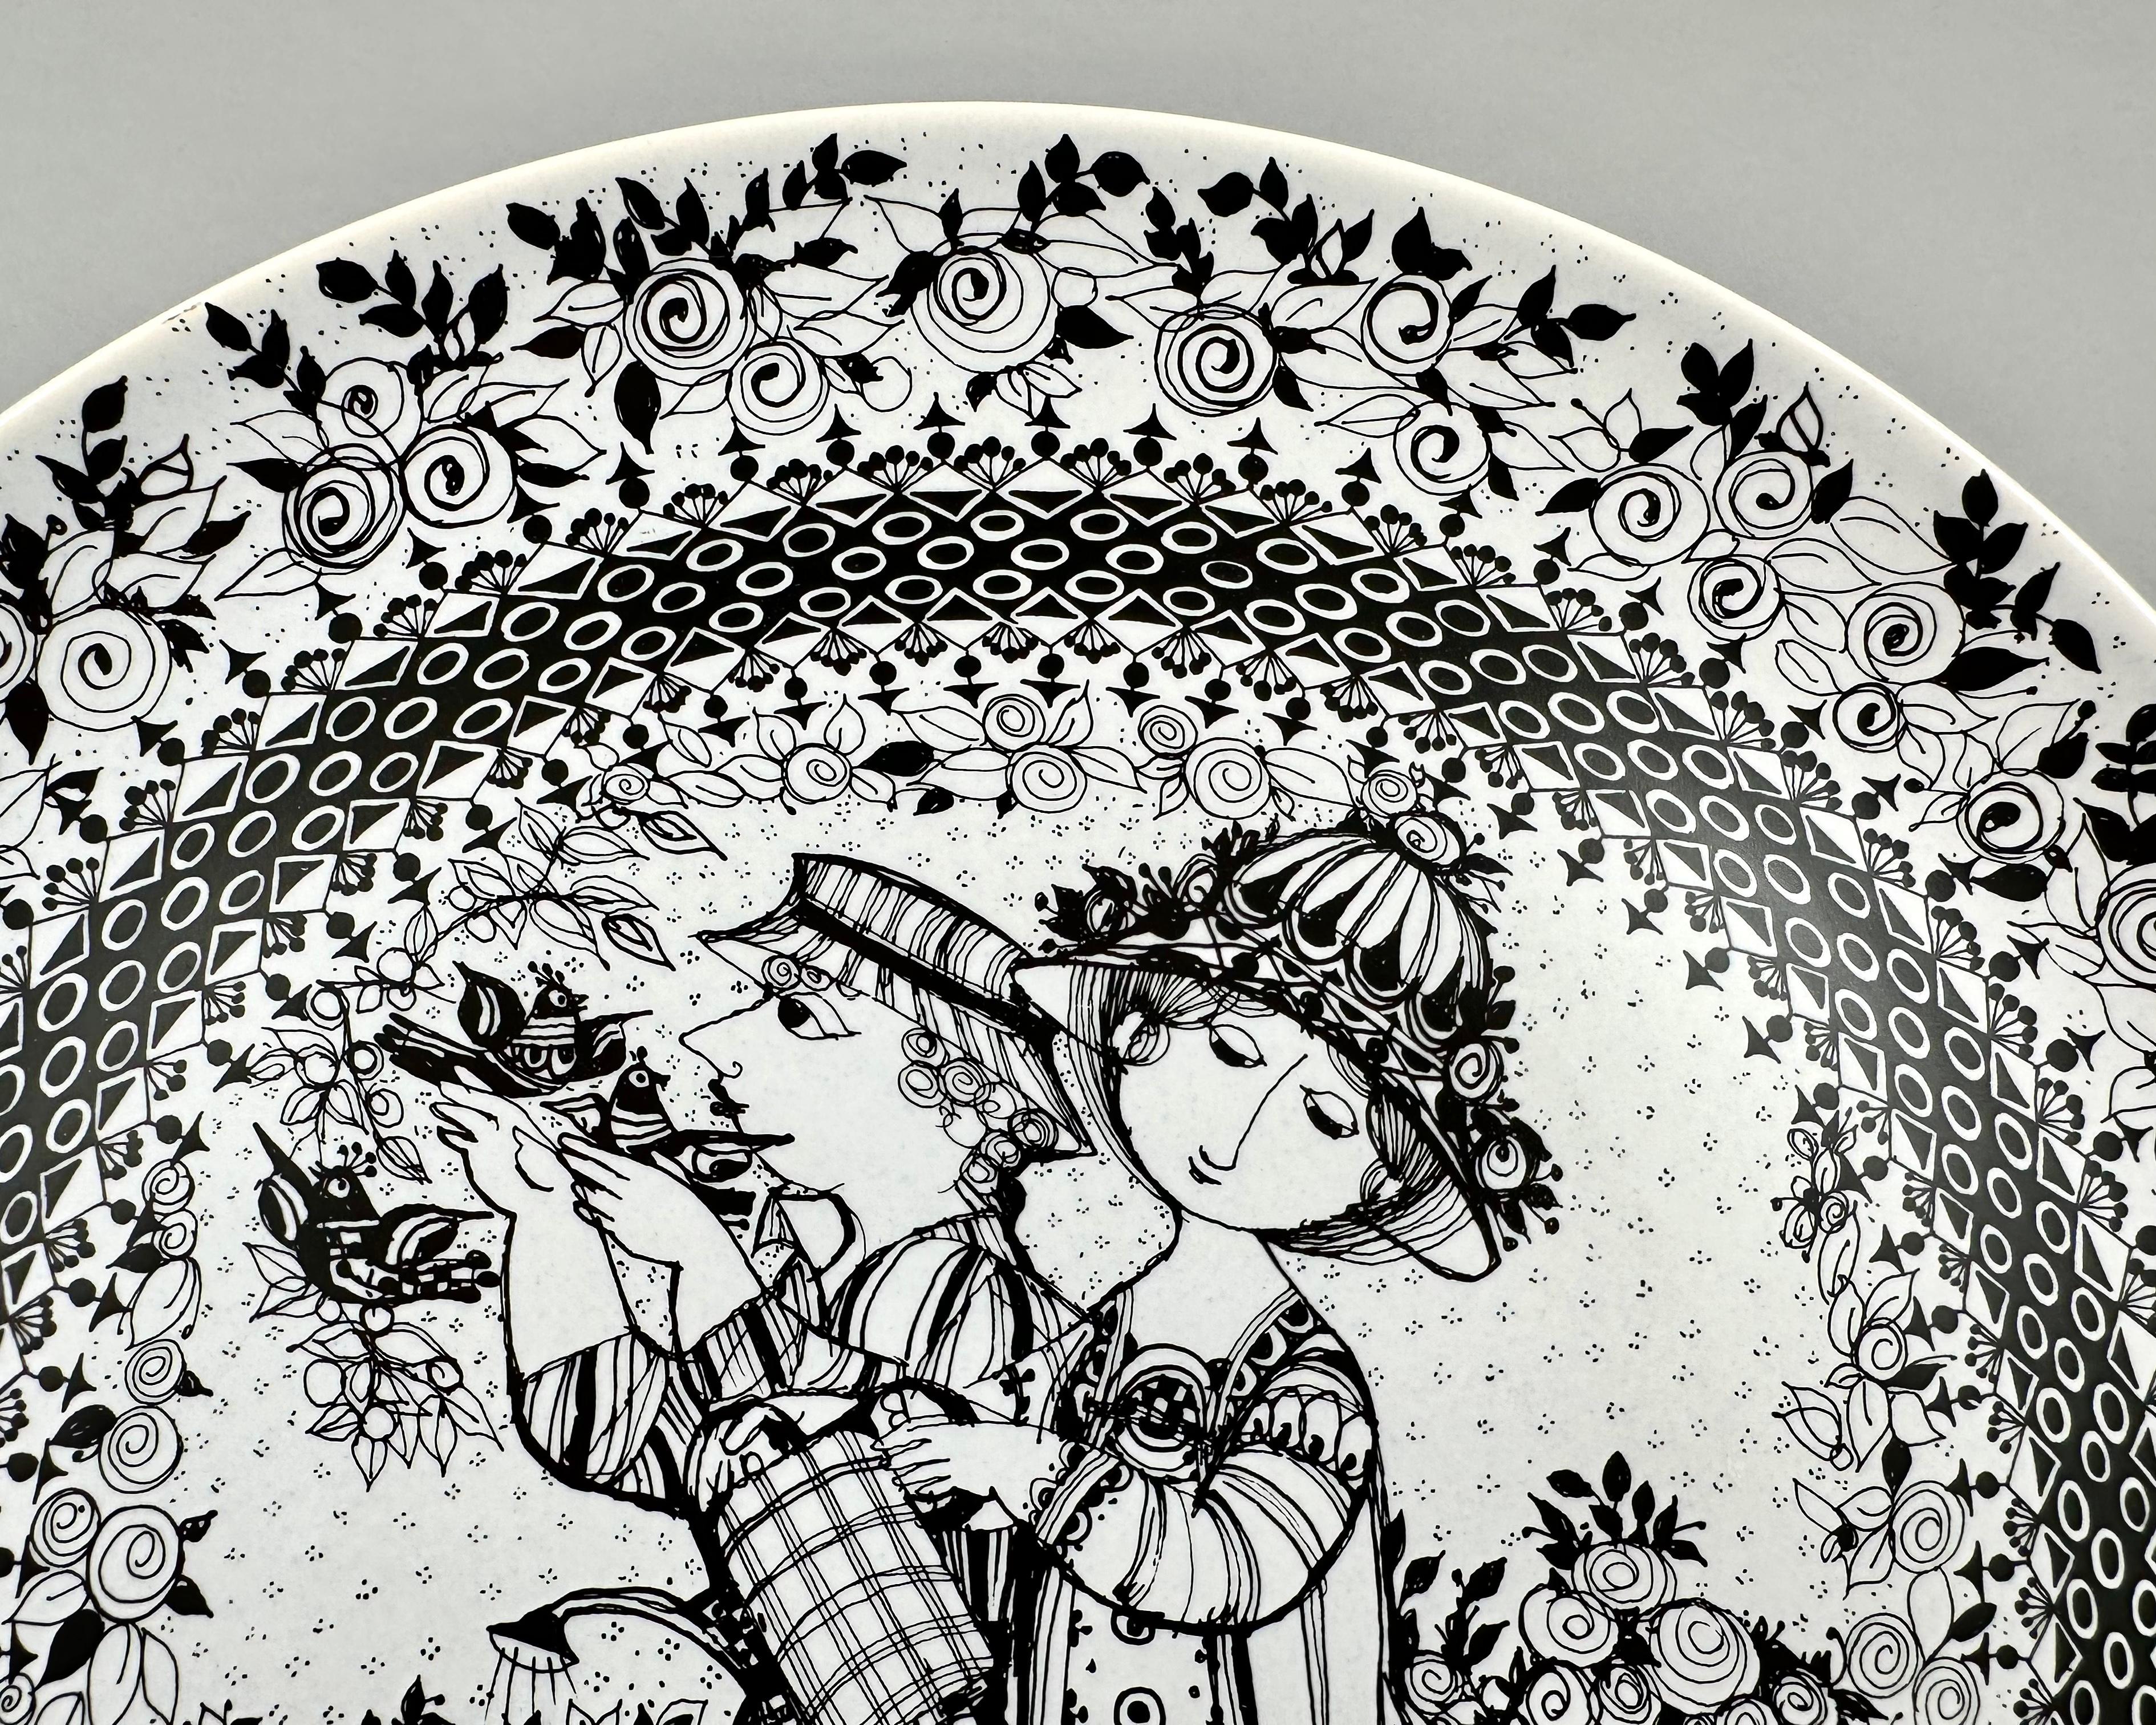 Summer Bjorn Wiinblad Four Seasons Plate For Rosenthal Studio-Line In Excellent Condition For Sale In Bastogne, BE